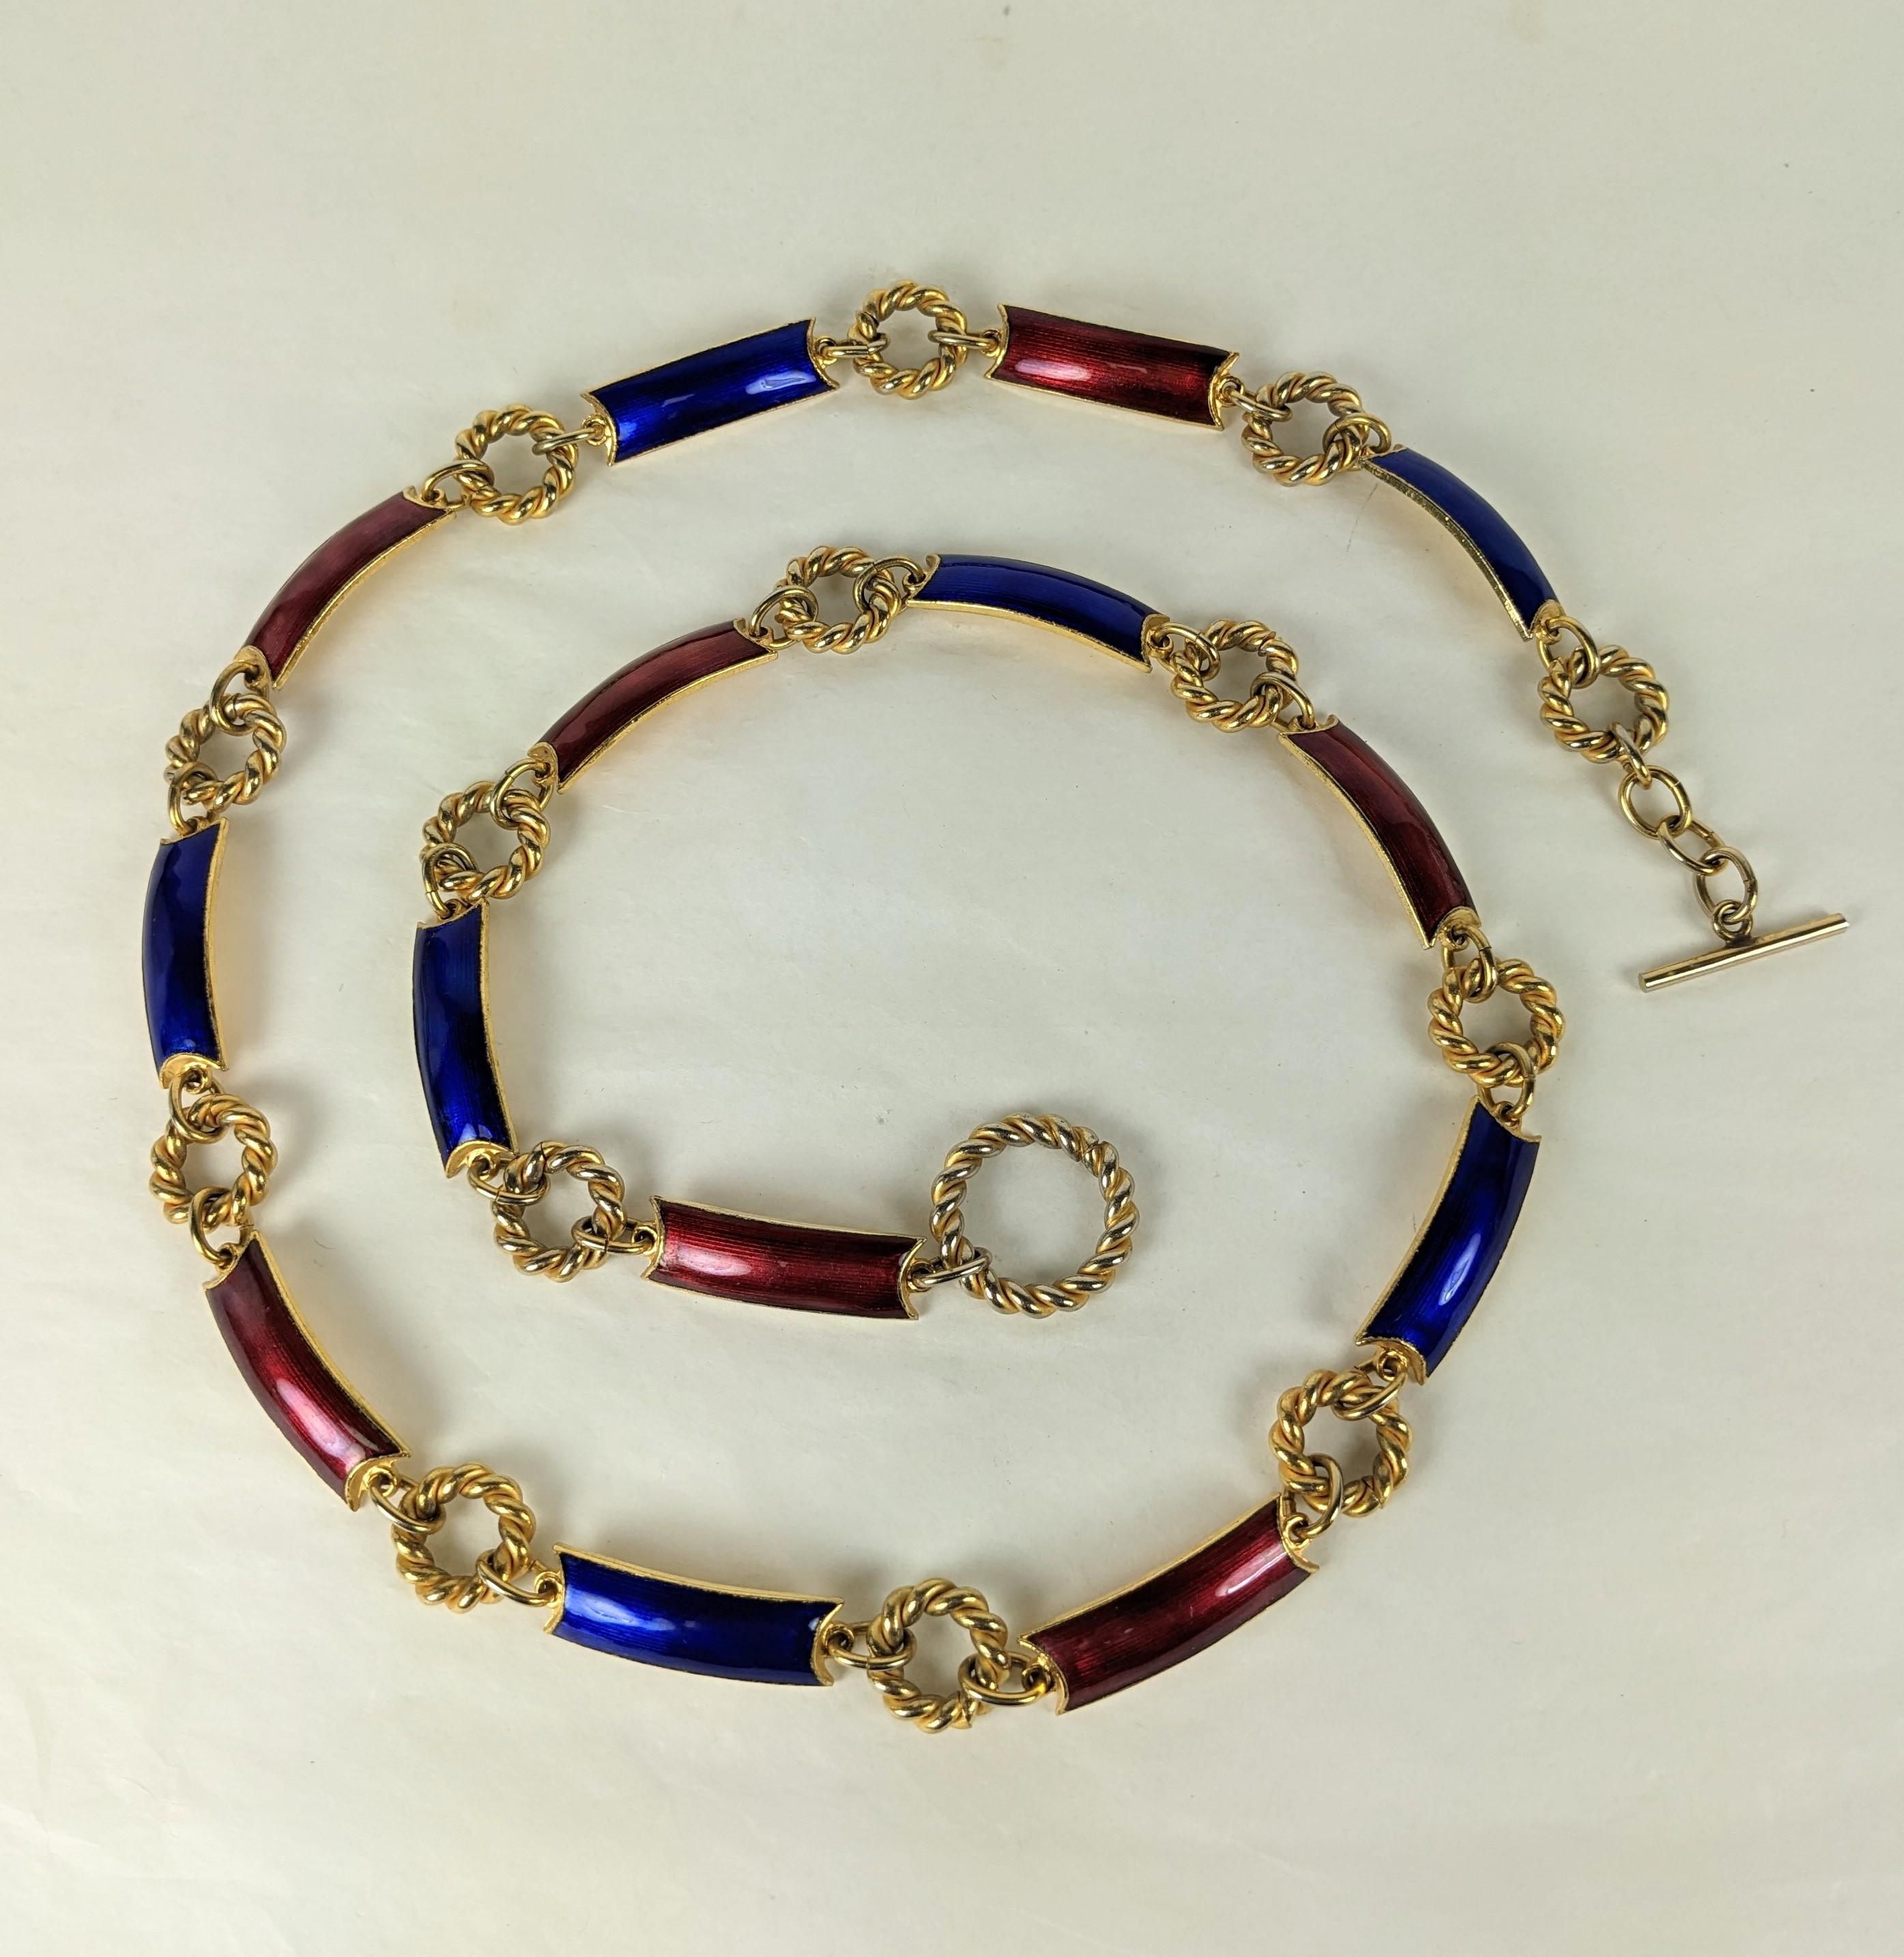 Vintage Gucci Enamel Link Belt from the 1960's. Curved links of gilt metal are enameled in deep blue and burgundy with twisted ring spacers. Signed toggle clasp allows for adjustable sizing. 1960's Italy. 